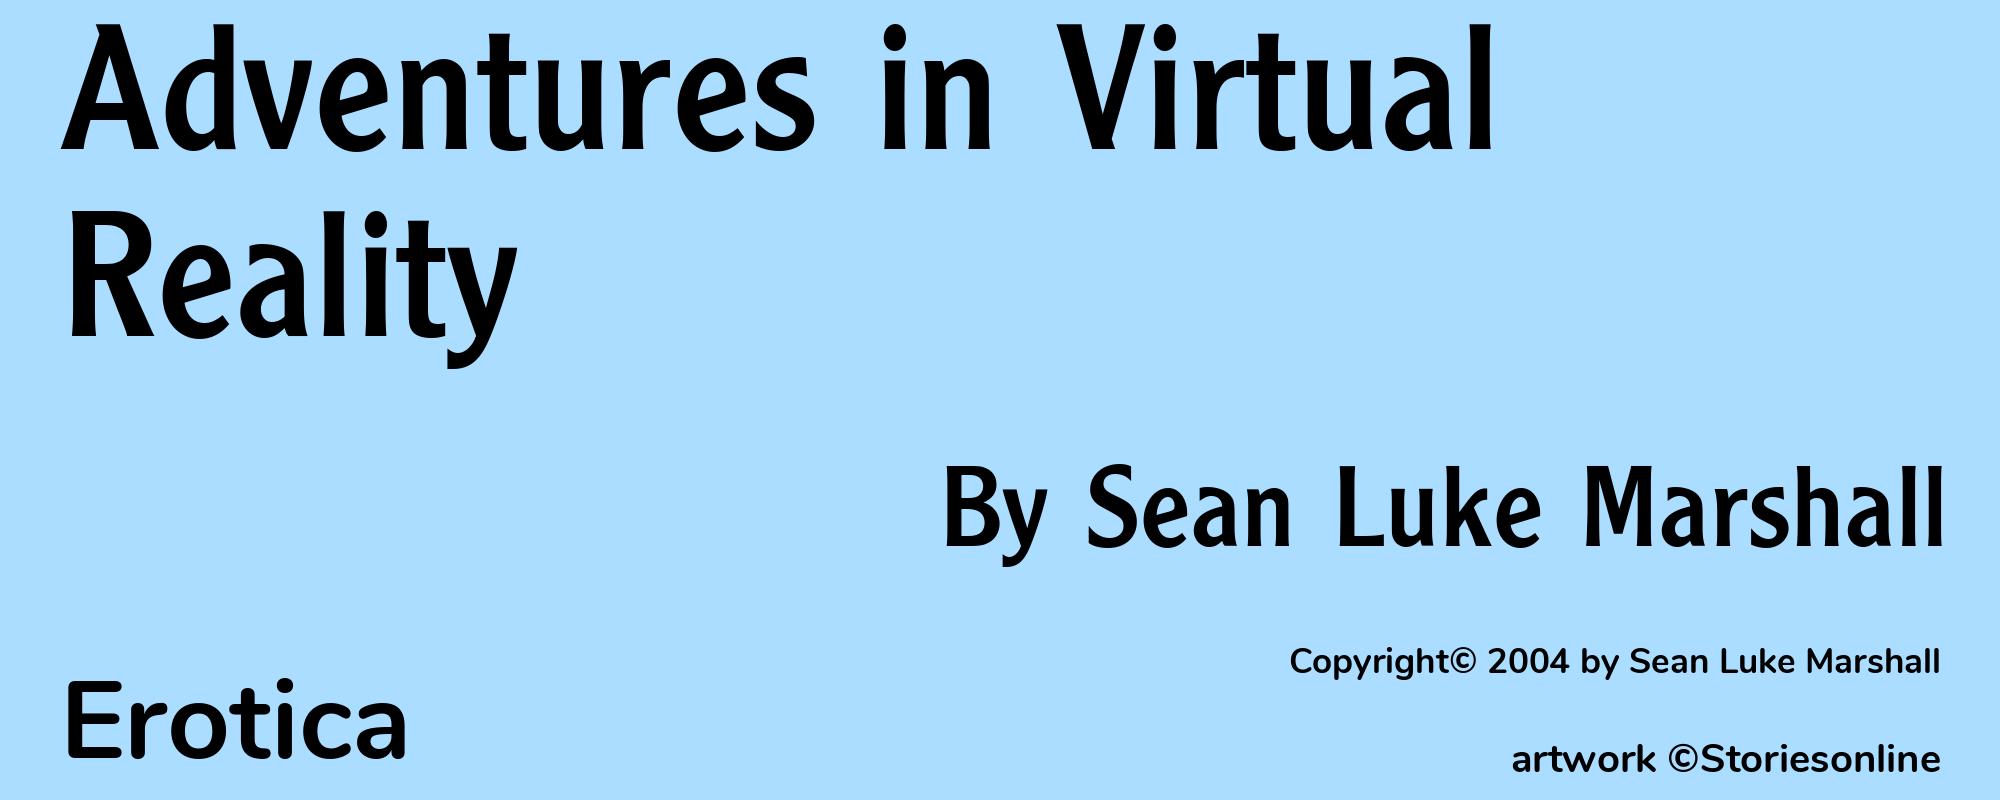 Adventures in Virtual Reality - Cover